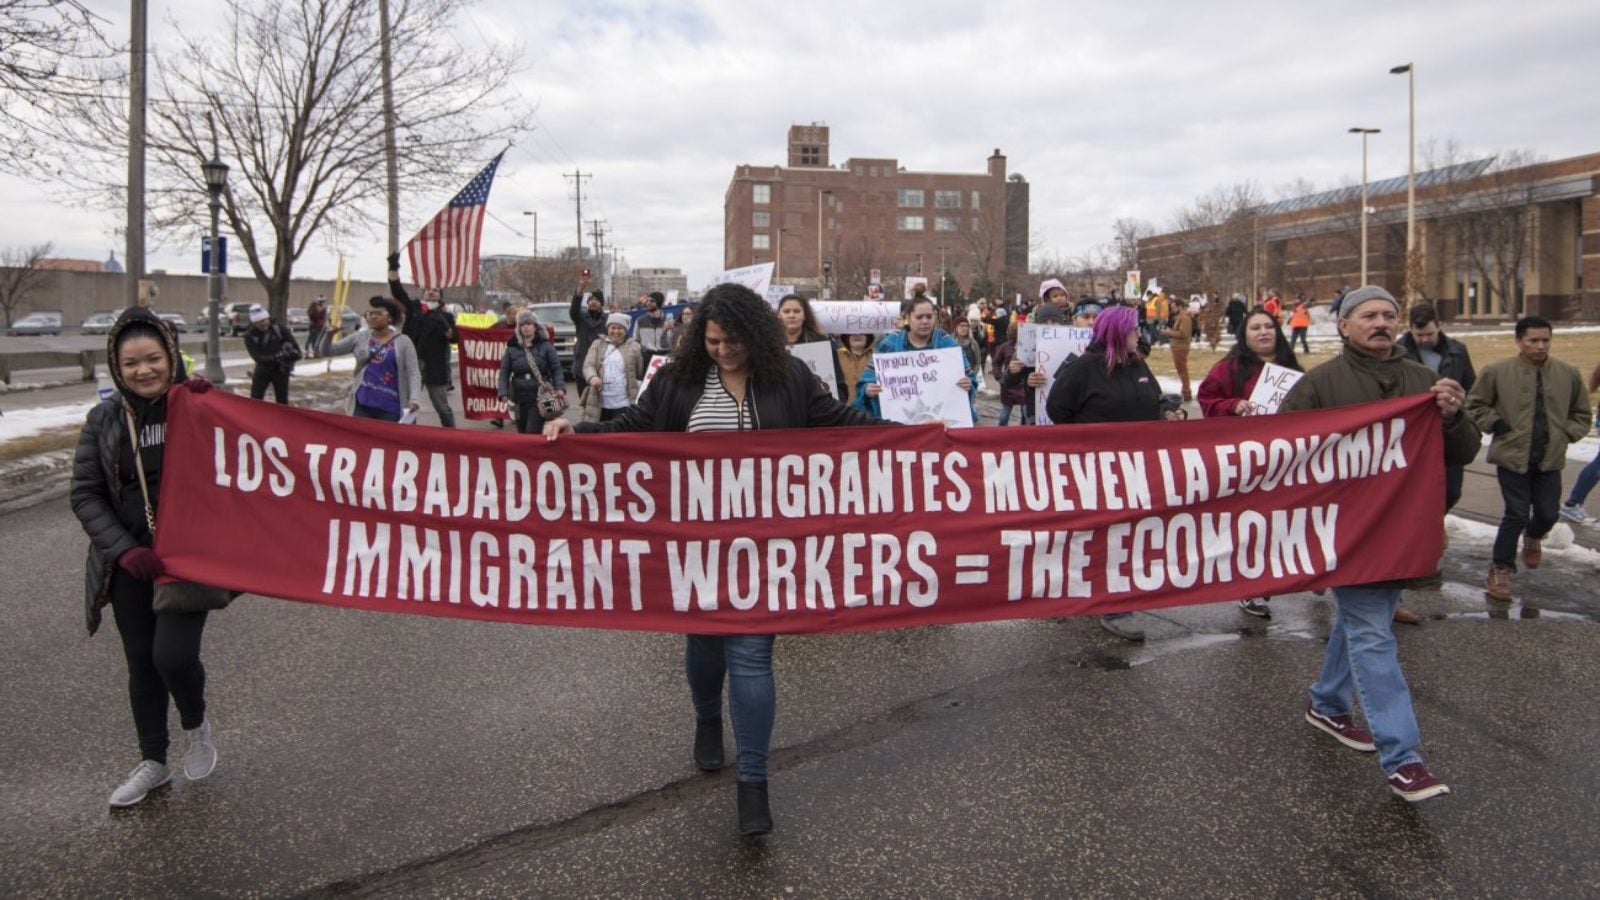 A group of protestors with pro-immigration signs in Spanish